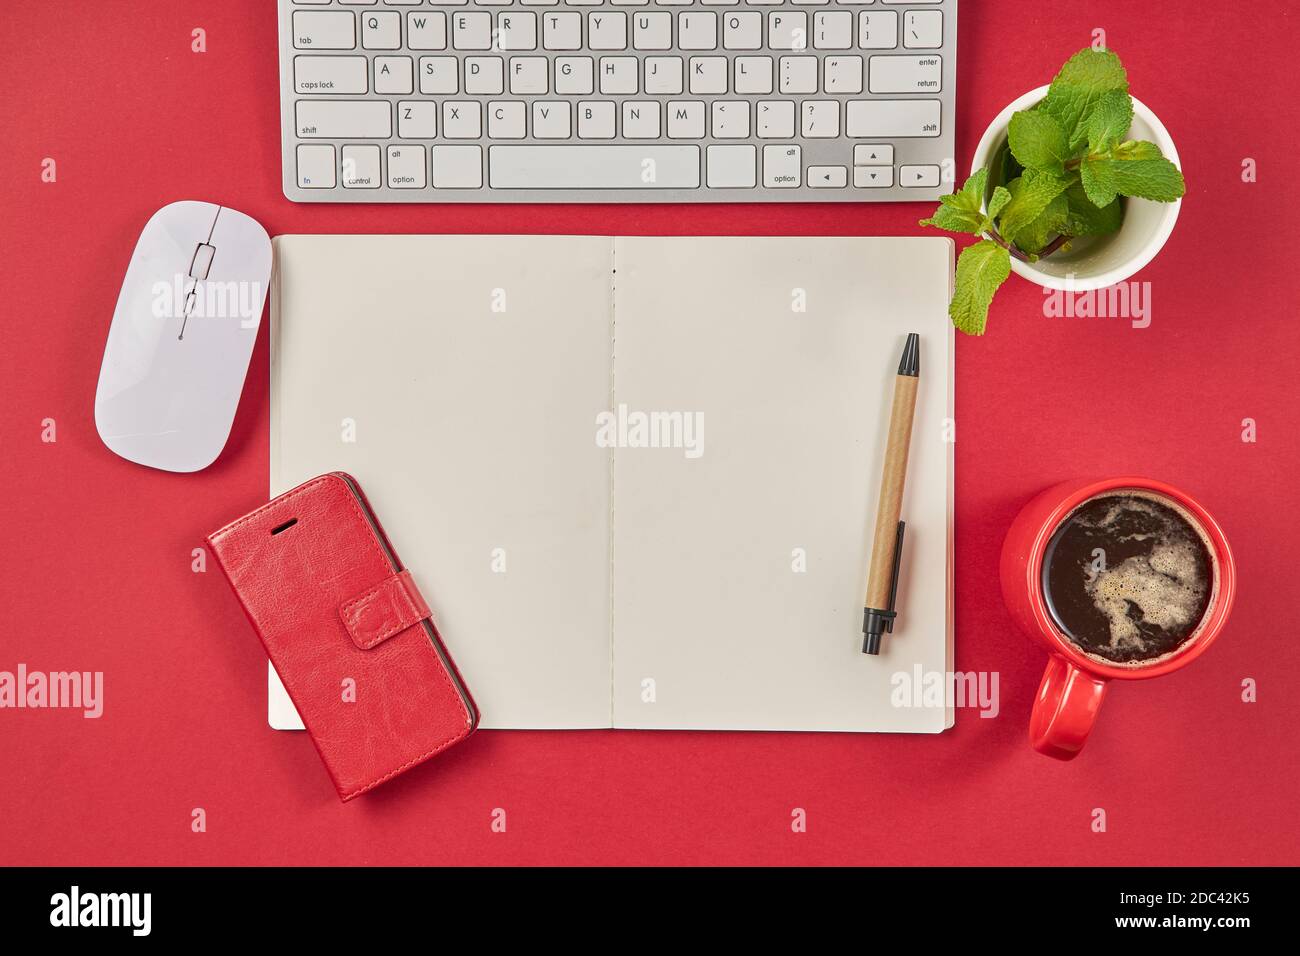 Red office desk table with blank notebook, keyboard and coffee cup. Top view with copy space. Stock Photo